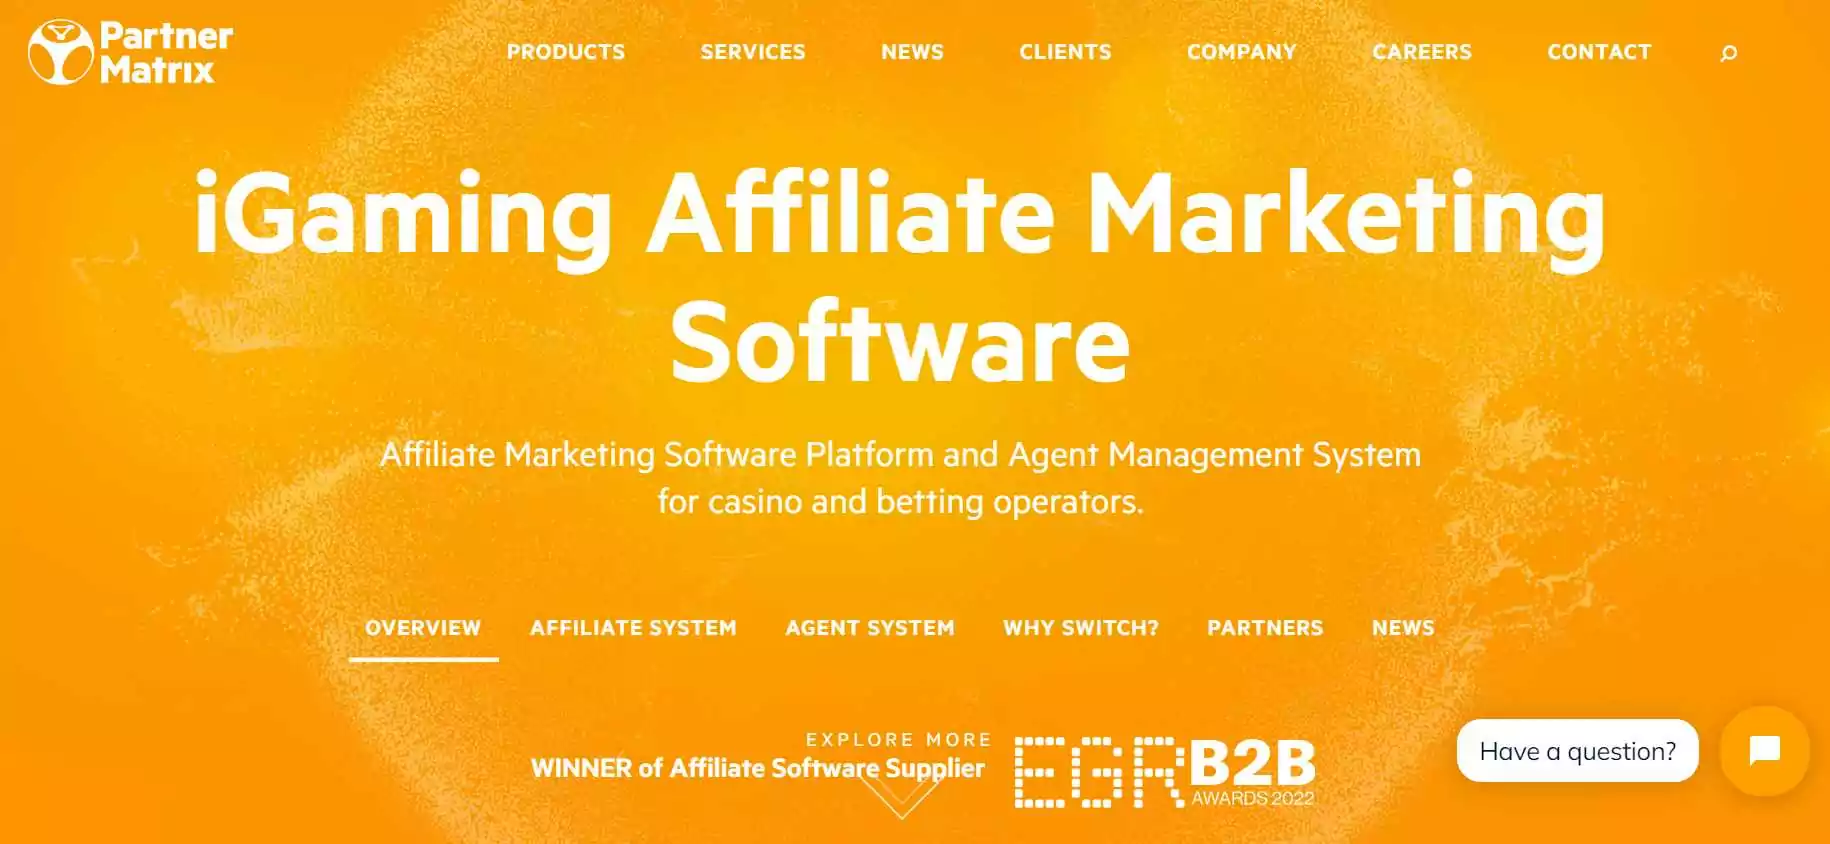 igaming-affiliate-marketing-software